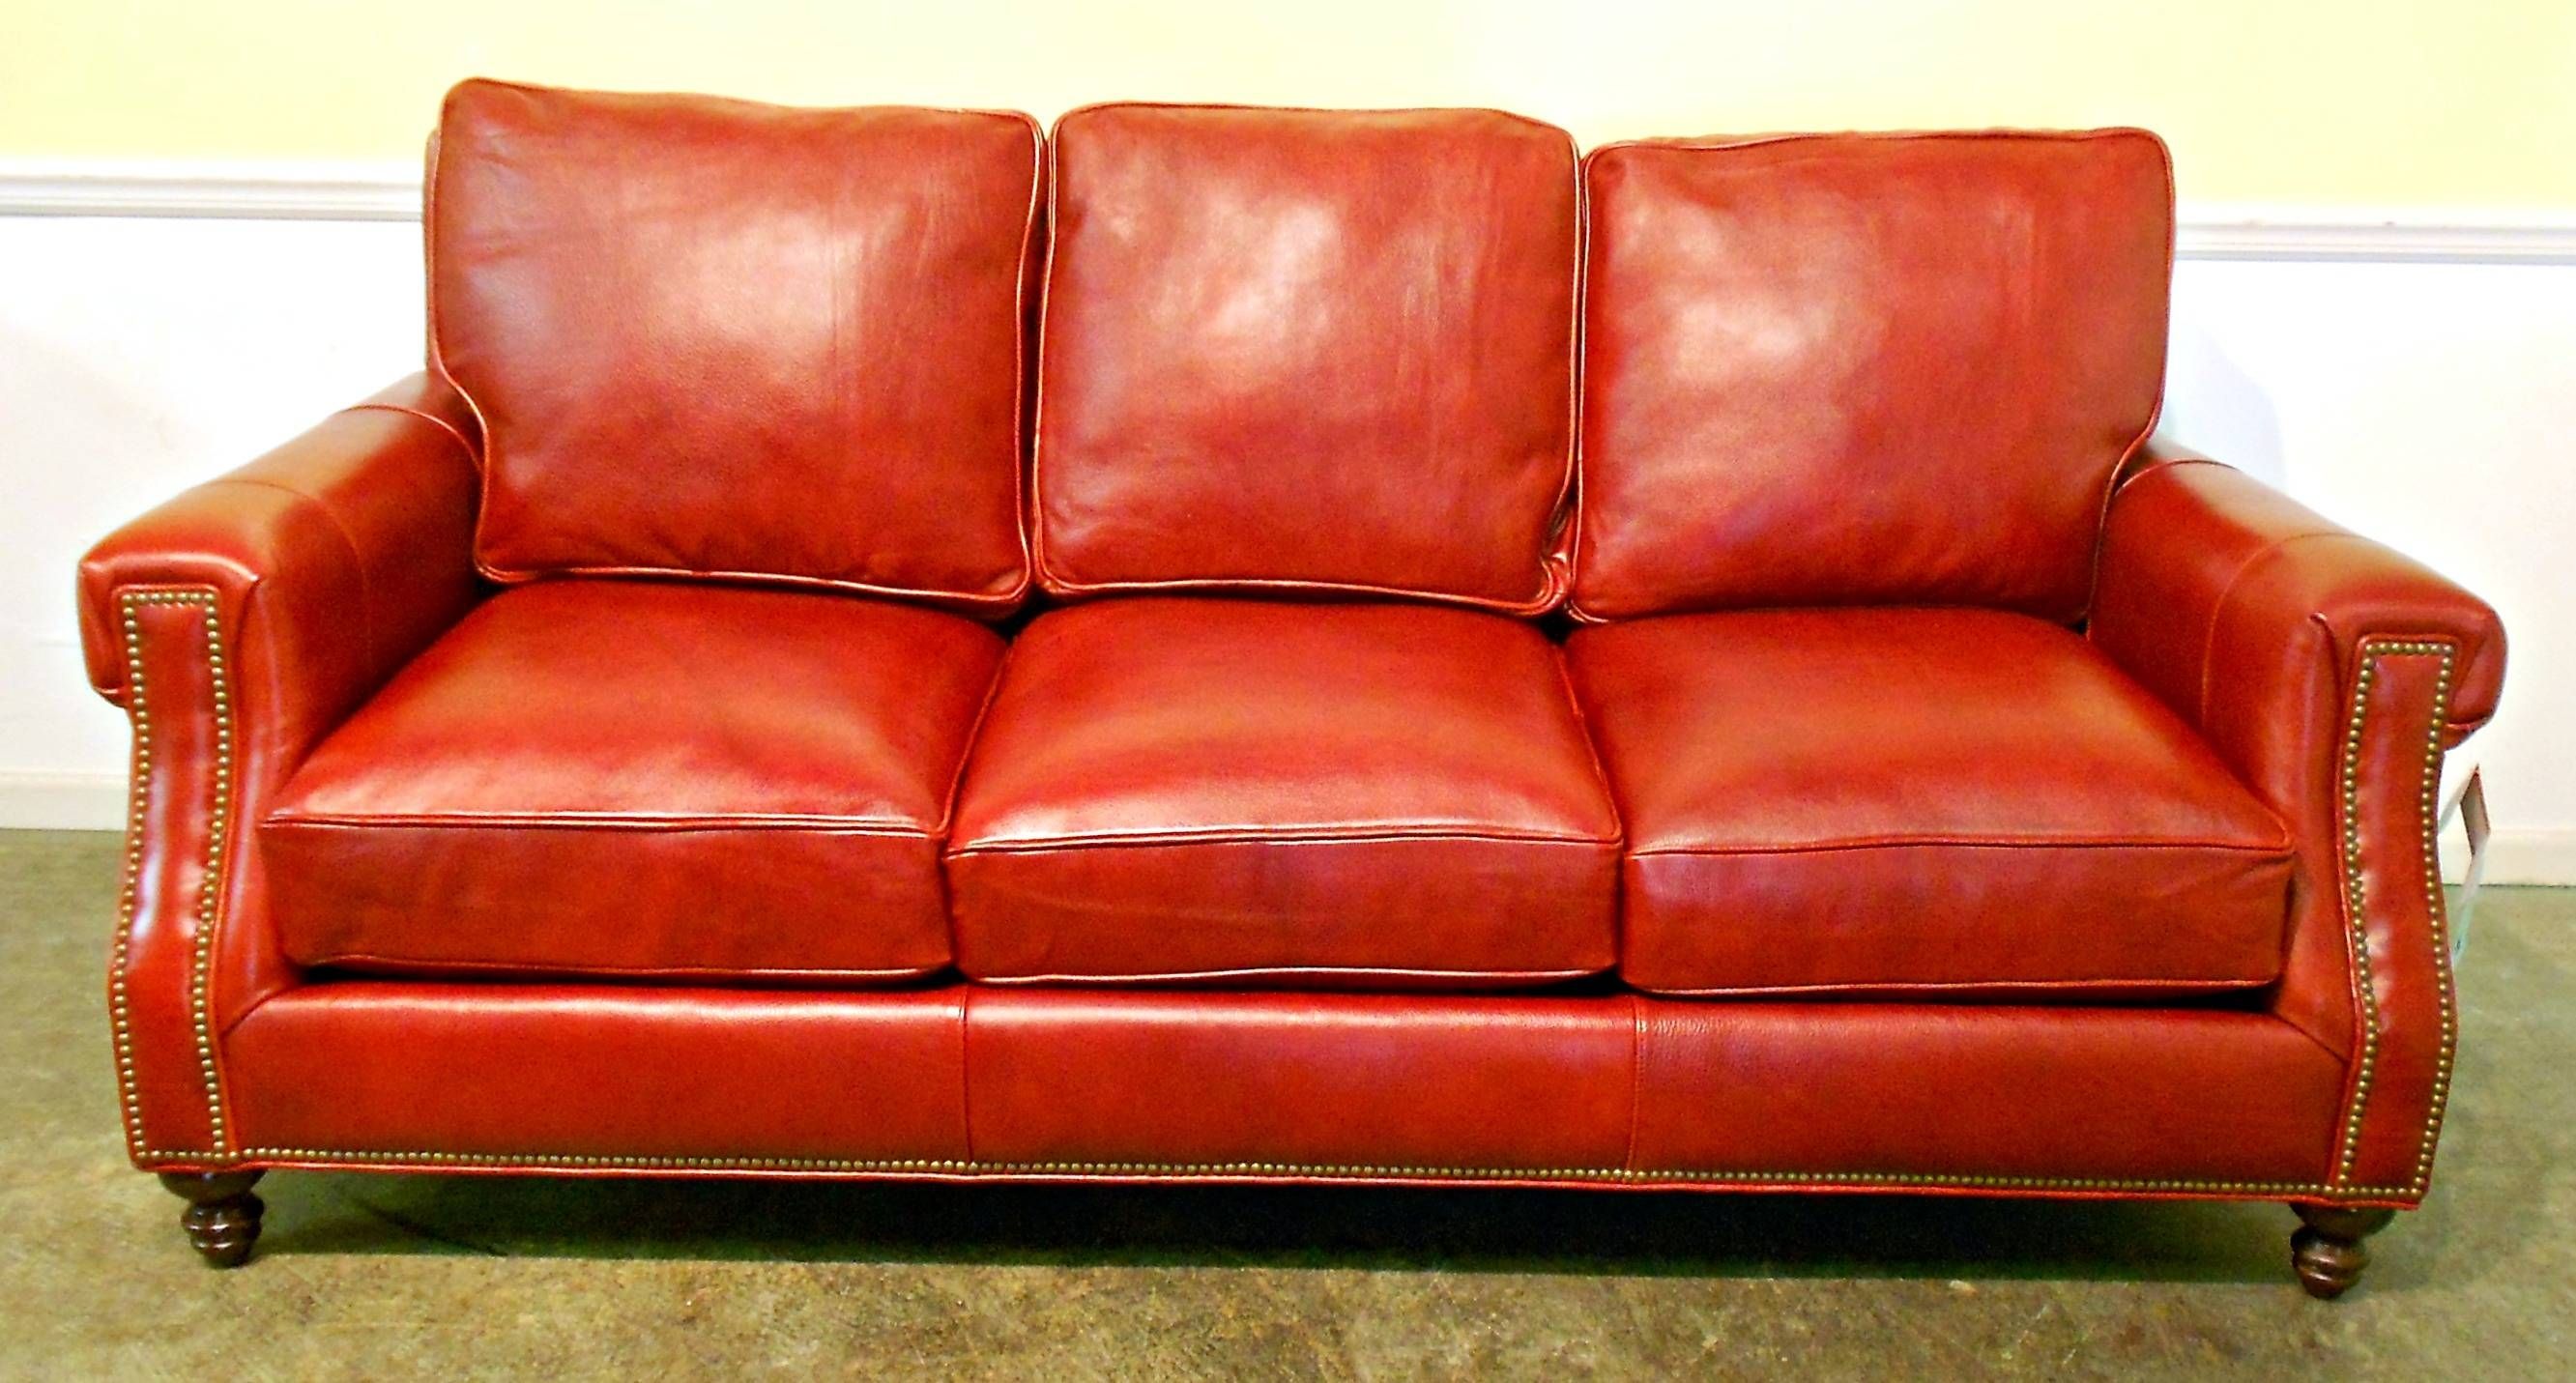 Luxury Leather Sofas Top Preferred Home Design Intended For Dark Red Leather Sofas (View 15 of 15)